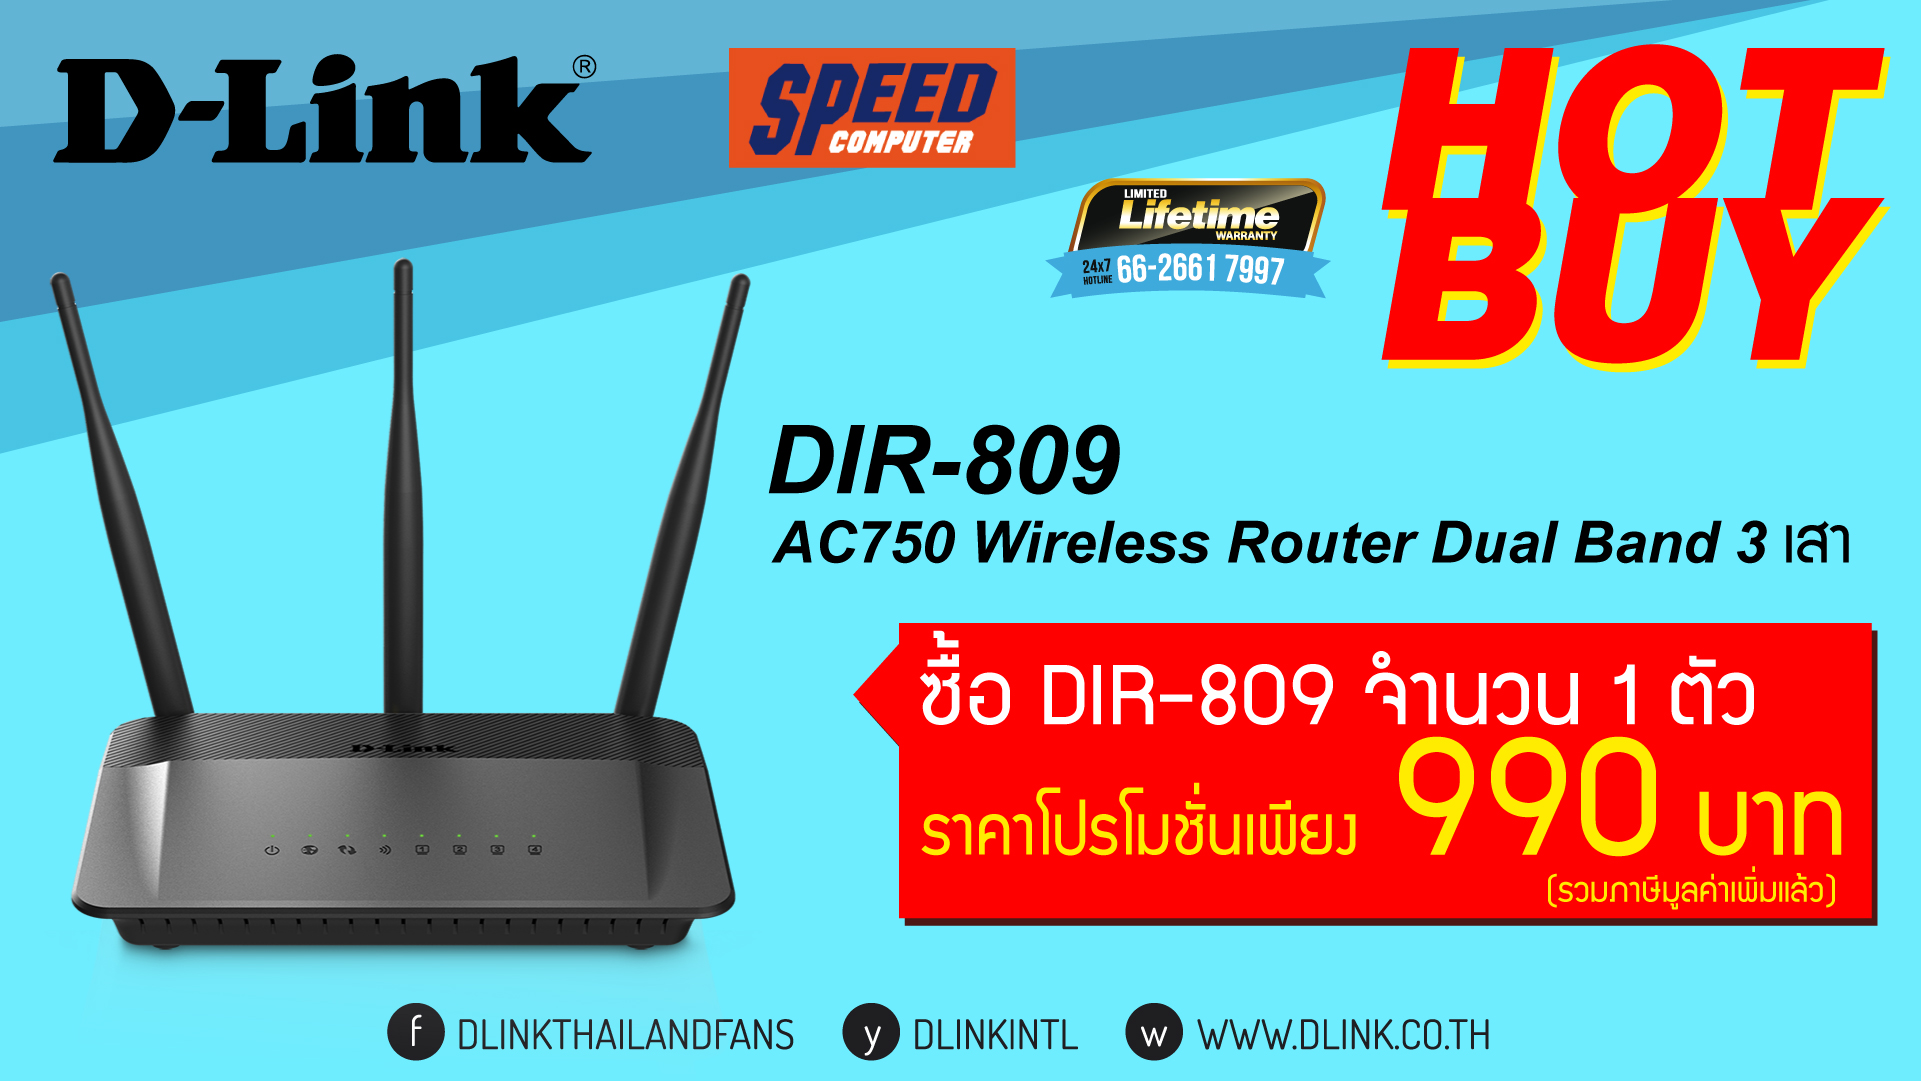 D-Link-Commart-Screen-for-Speed-March-16-11